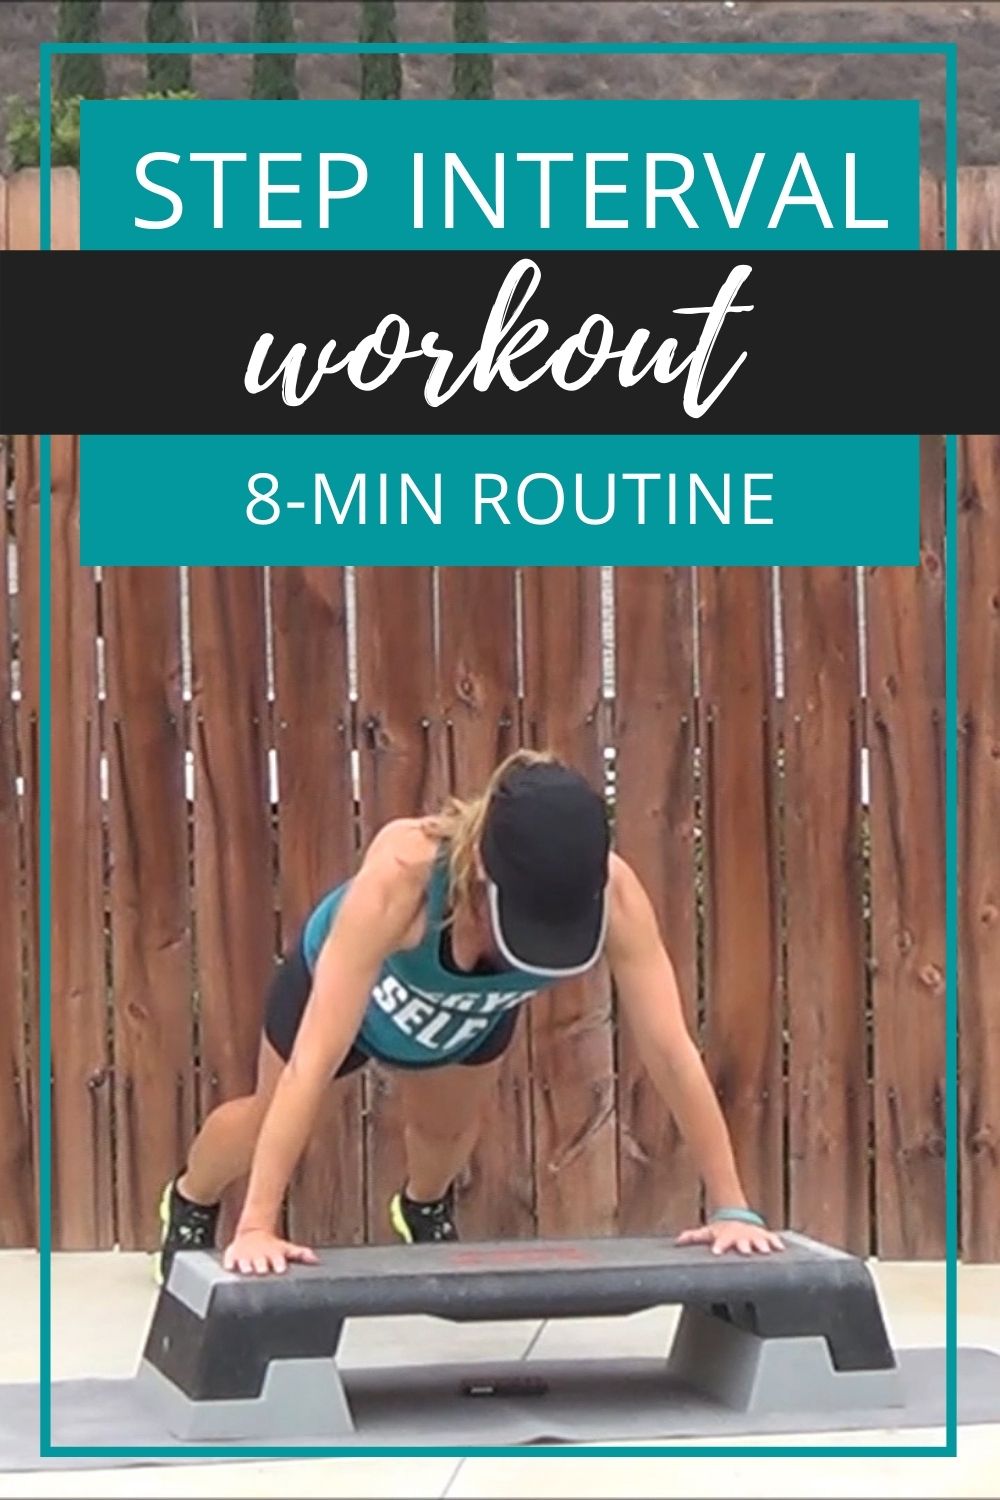 step interval workout 8-min routine